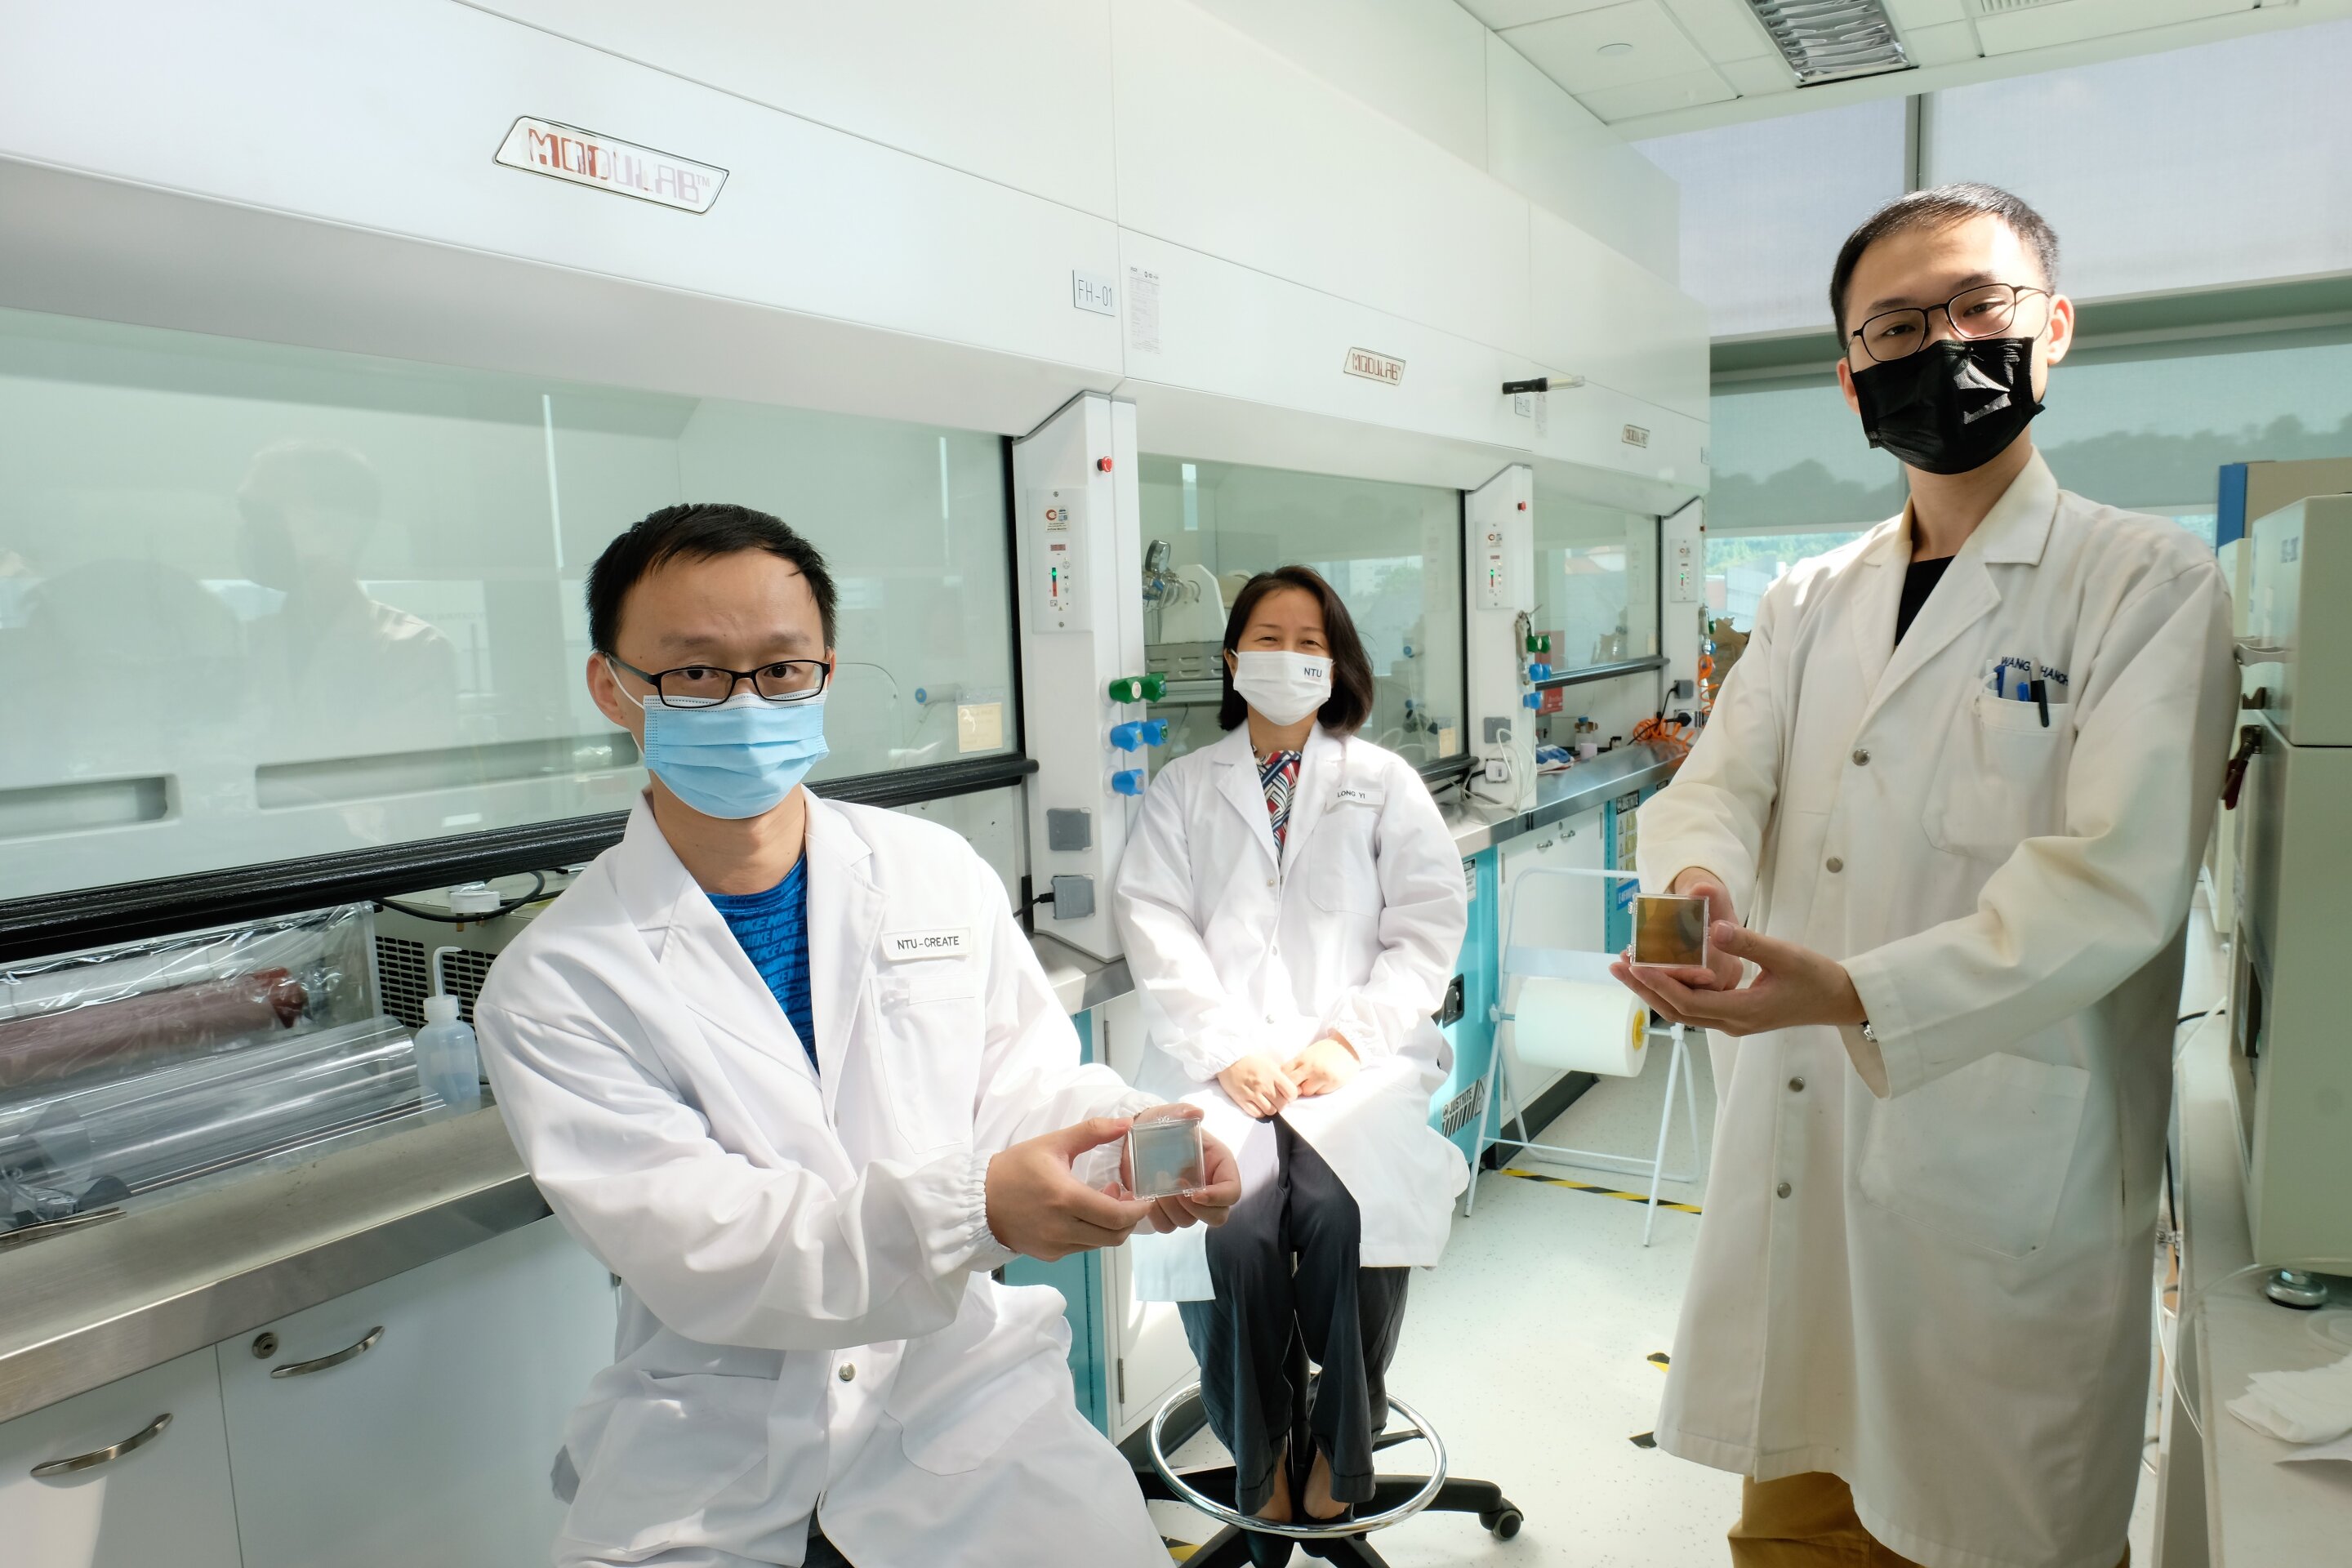 NTU Singapore scientists invent energy-saving glass that 'self-adapts' to heating and cooling demand